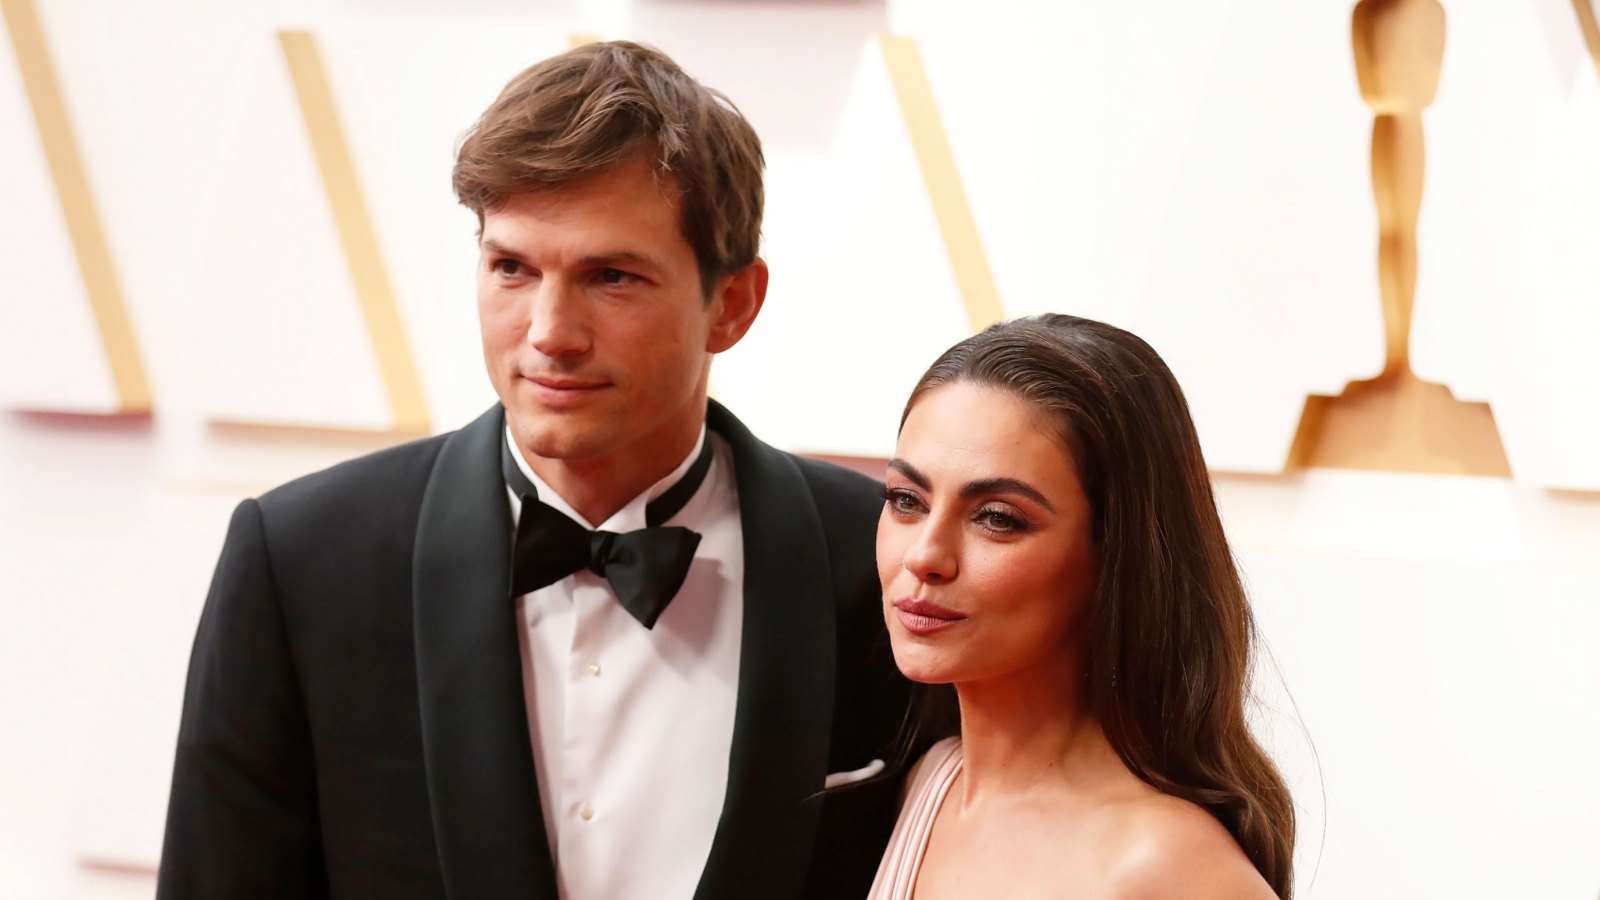 Mila Kunis Reveals How She and Ashton Kutcher Were Able to 'Power Through' His Health Scare: ‘You Just Do’ blush gown